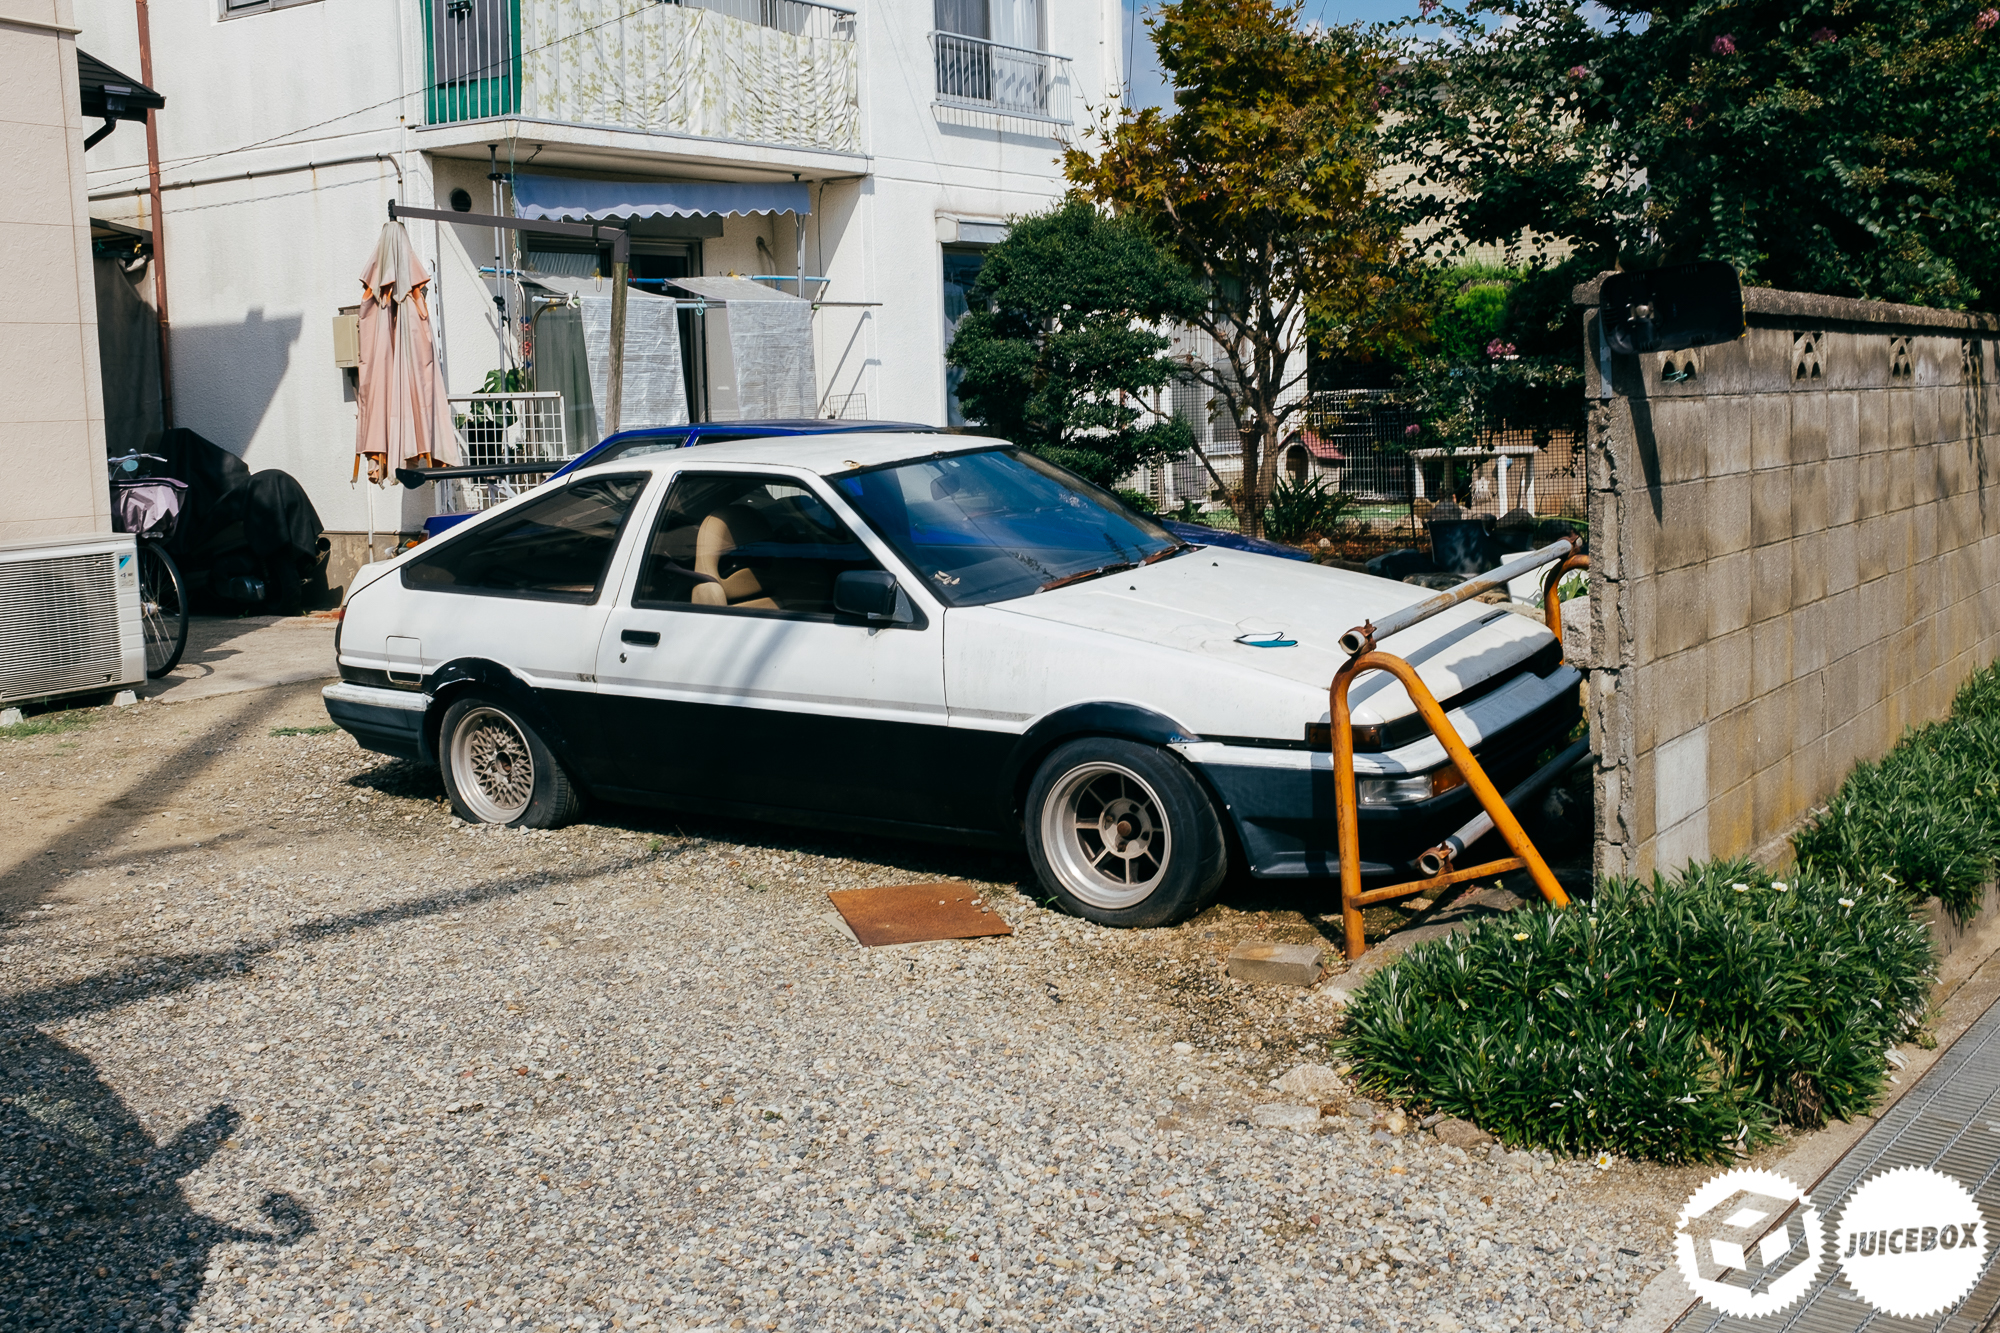 Japan in a Van – Abandoned AE86’s and Impulse Garage